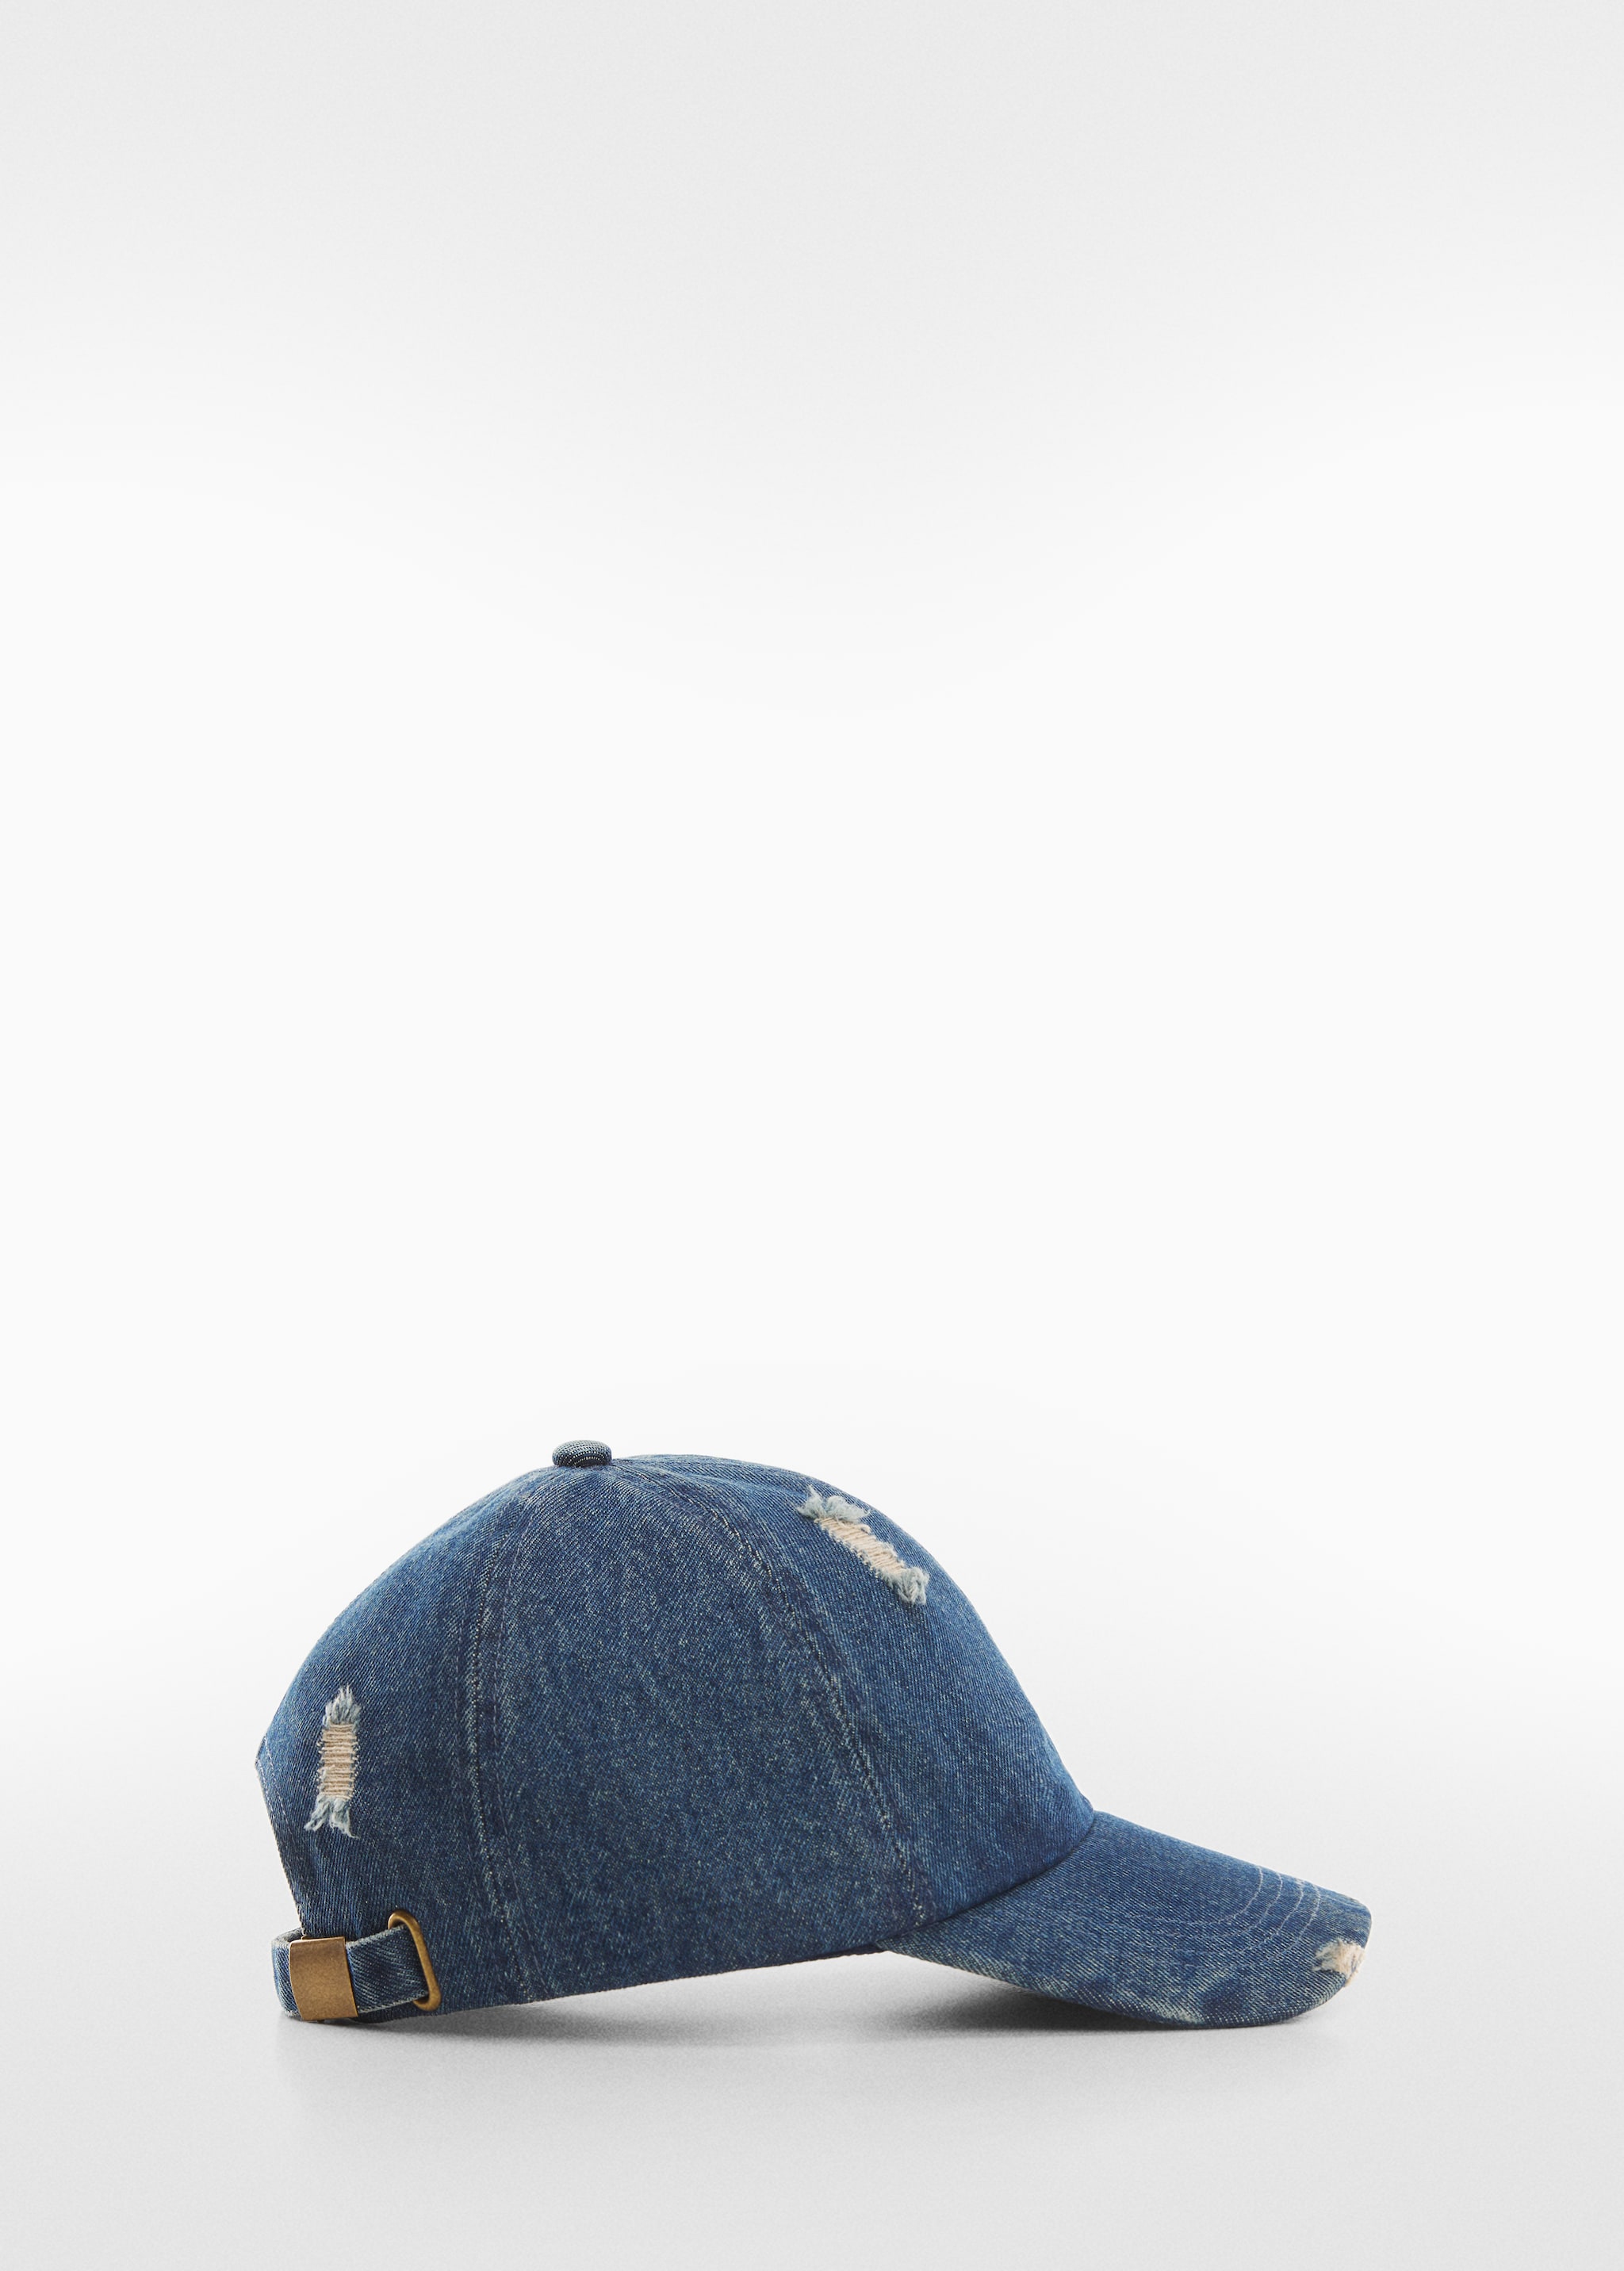 Ripped denim cap - Article without model